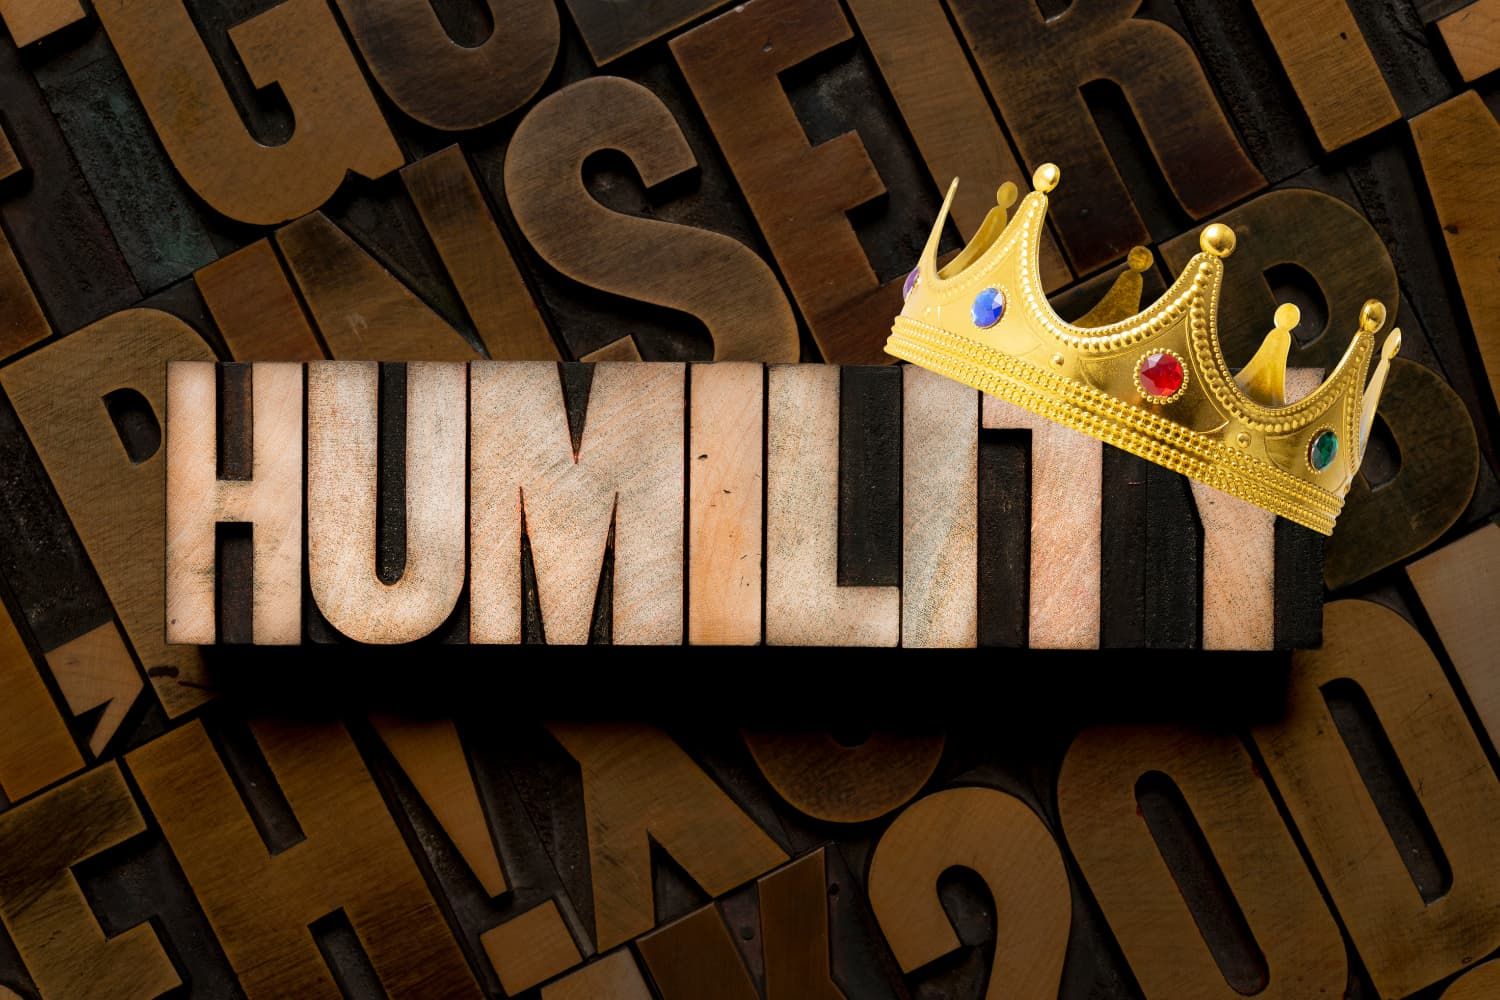 Prayer%20-%20NT%20Philippians%20-%20Crowns%20of%20humility-b83f3a0b Serving another